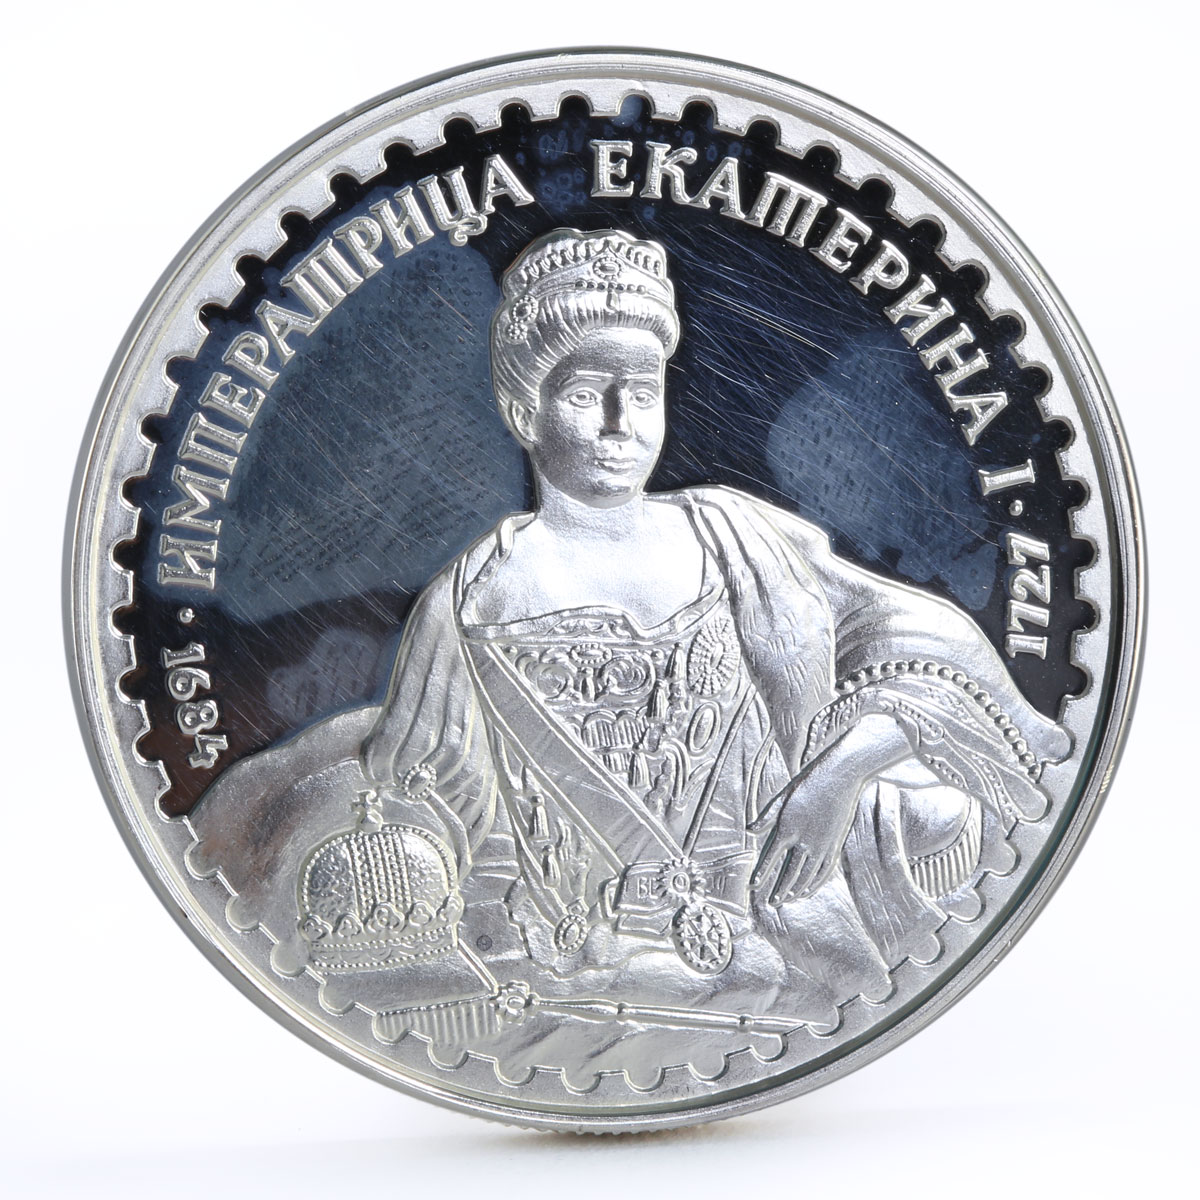 Russia Russian Tsars series Emperor Catherine the First proof silver medal